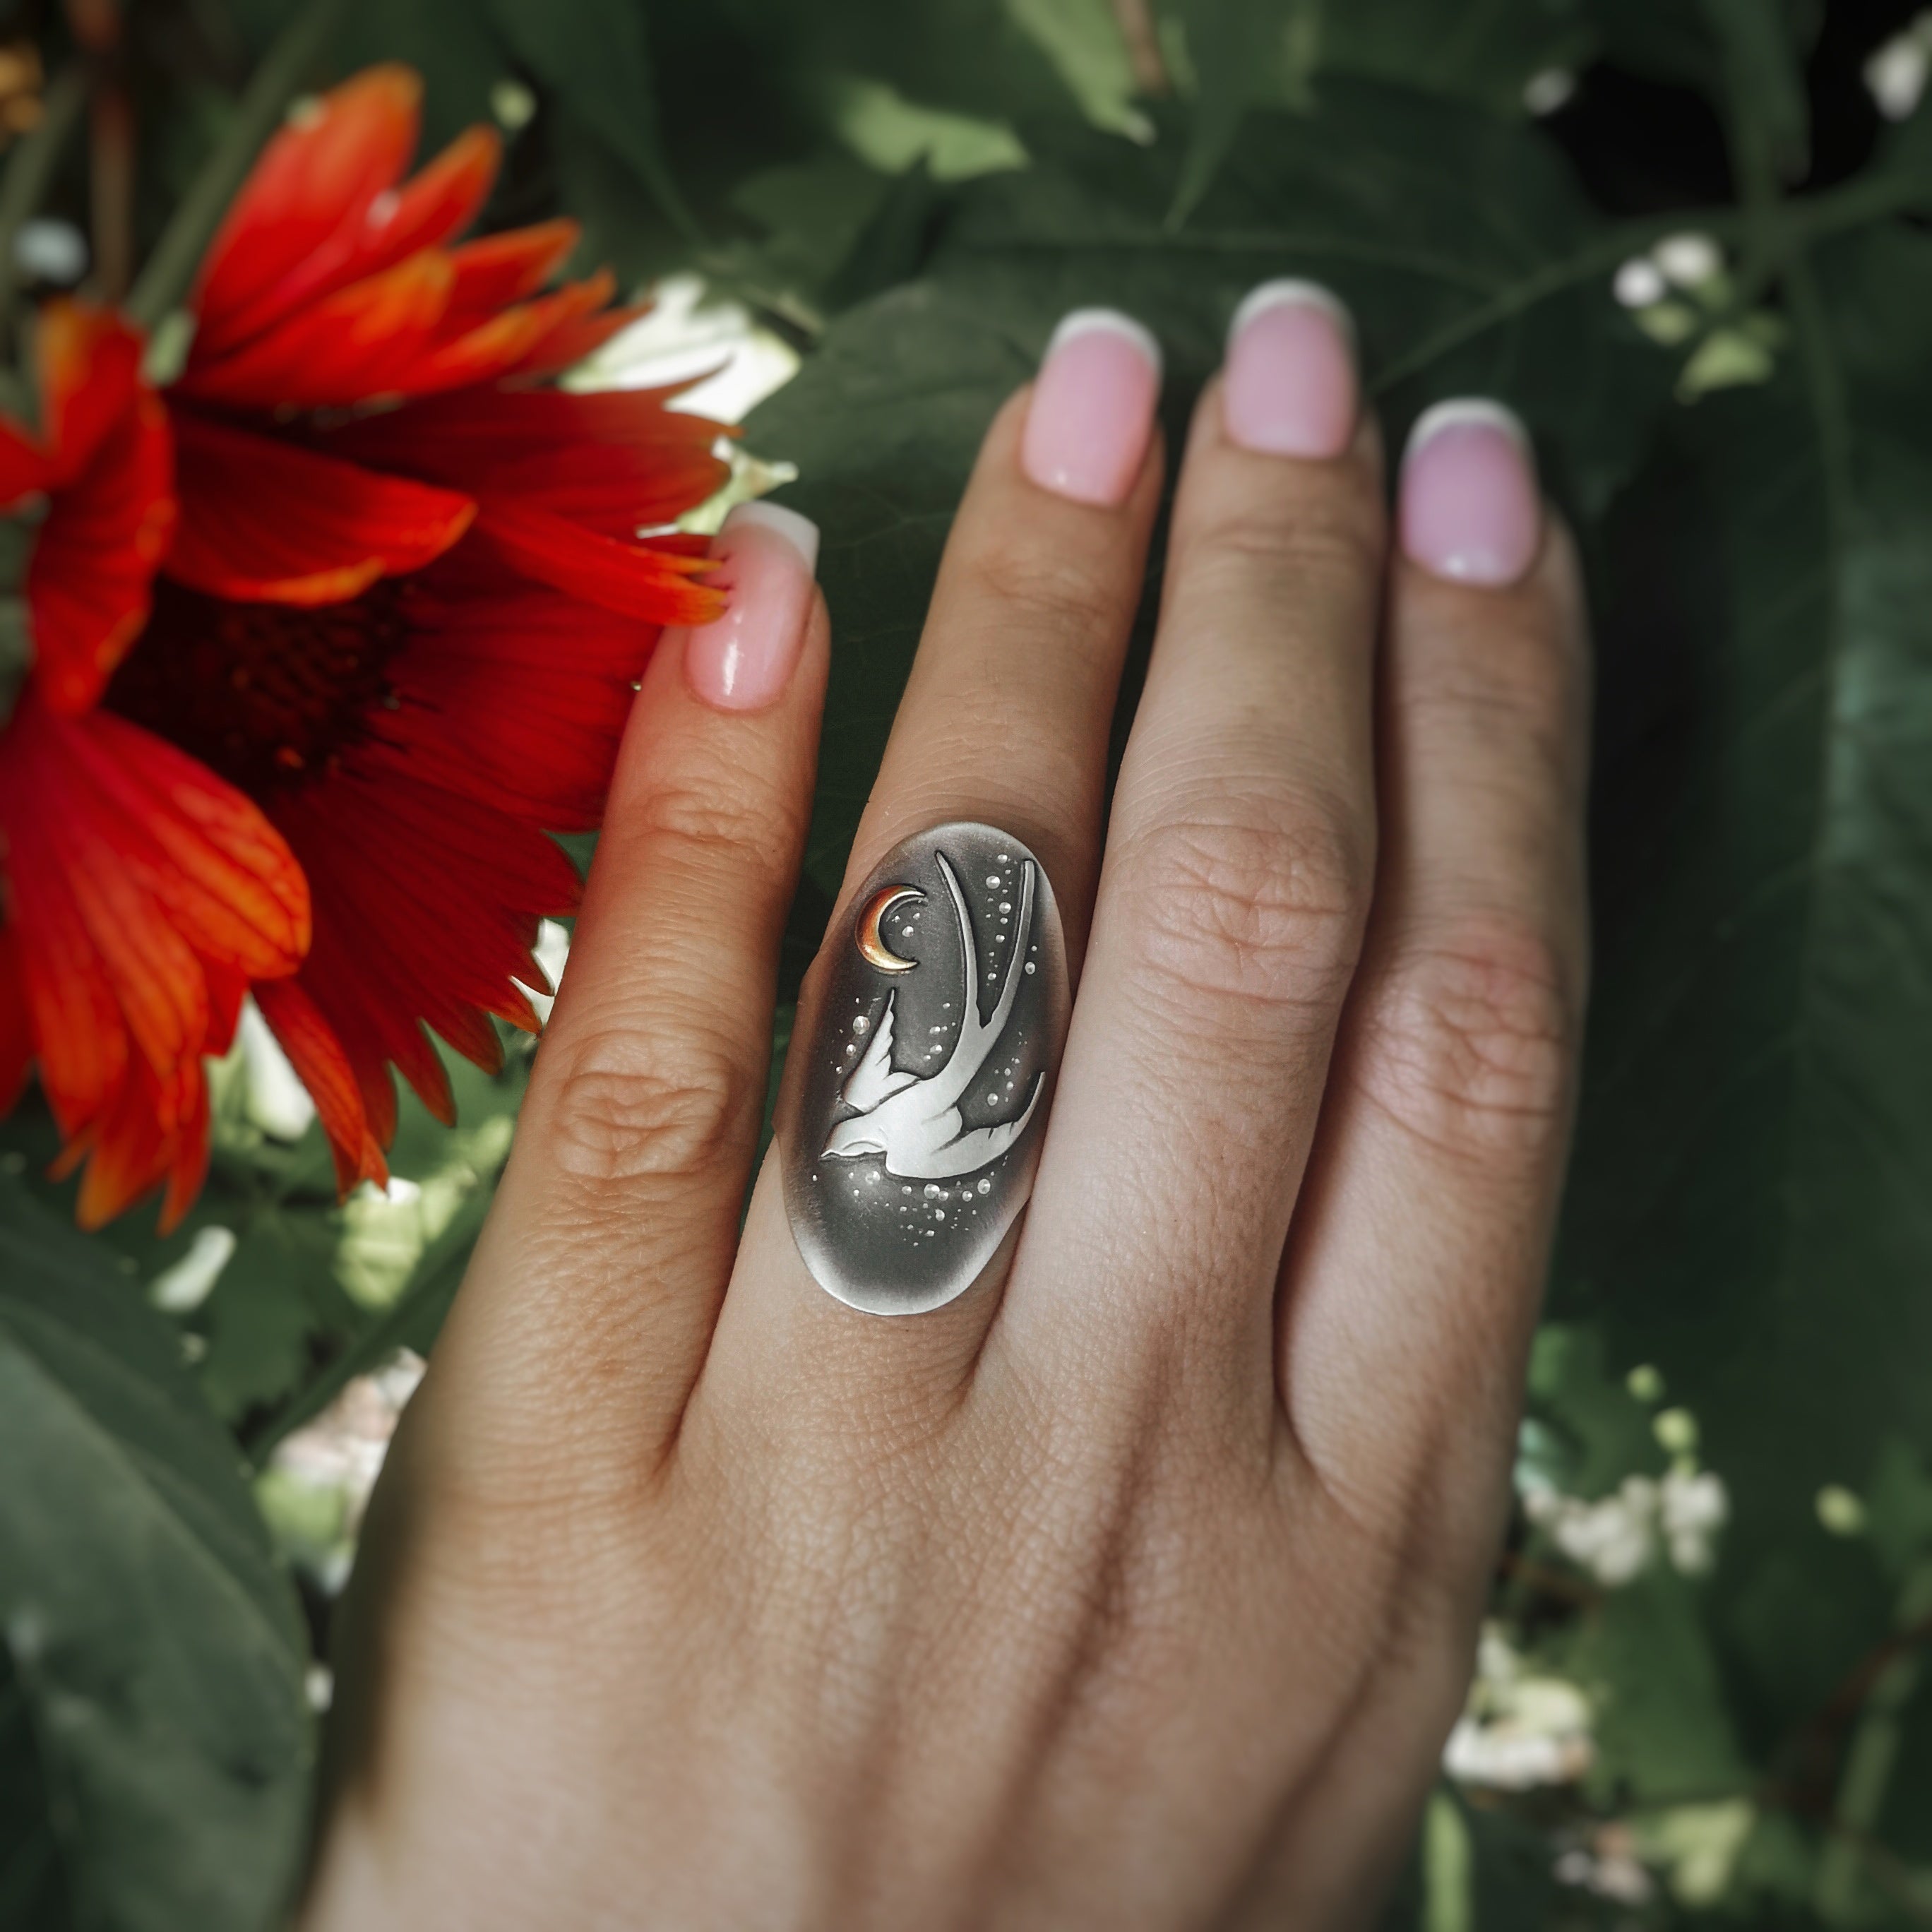 The Swallow & Moon Ring